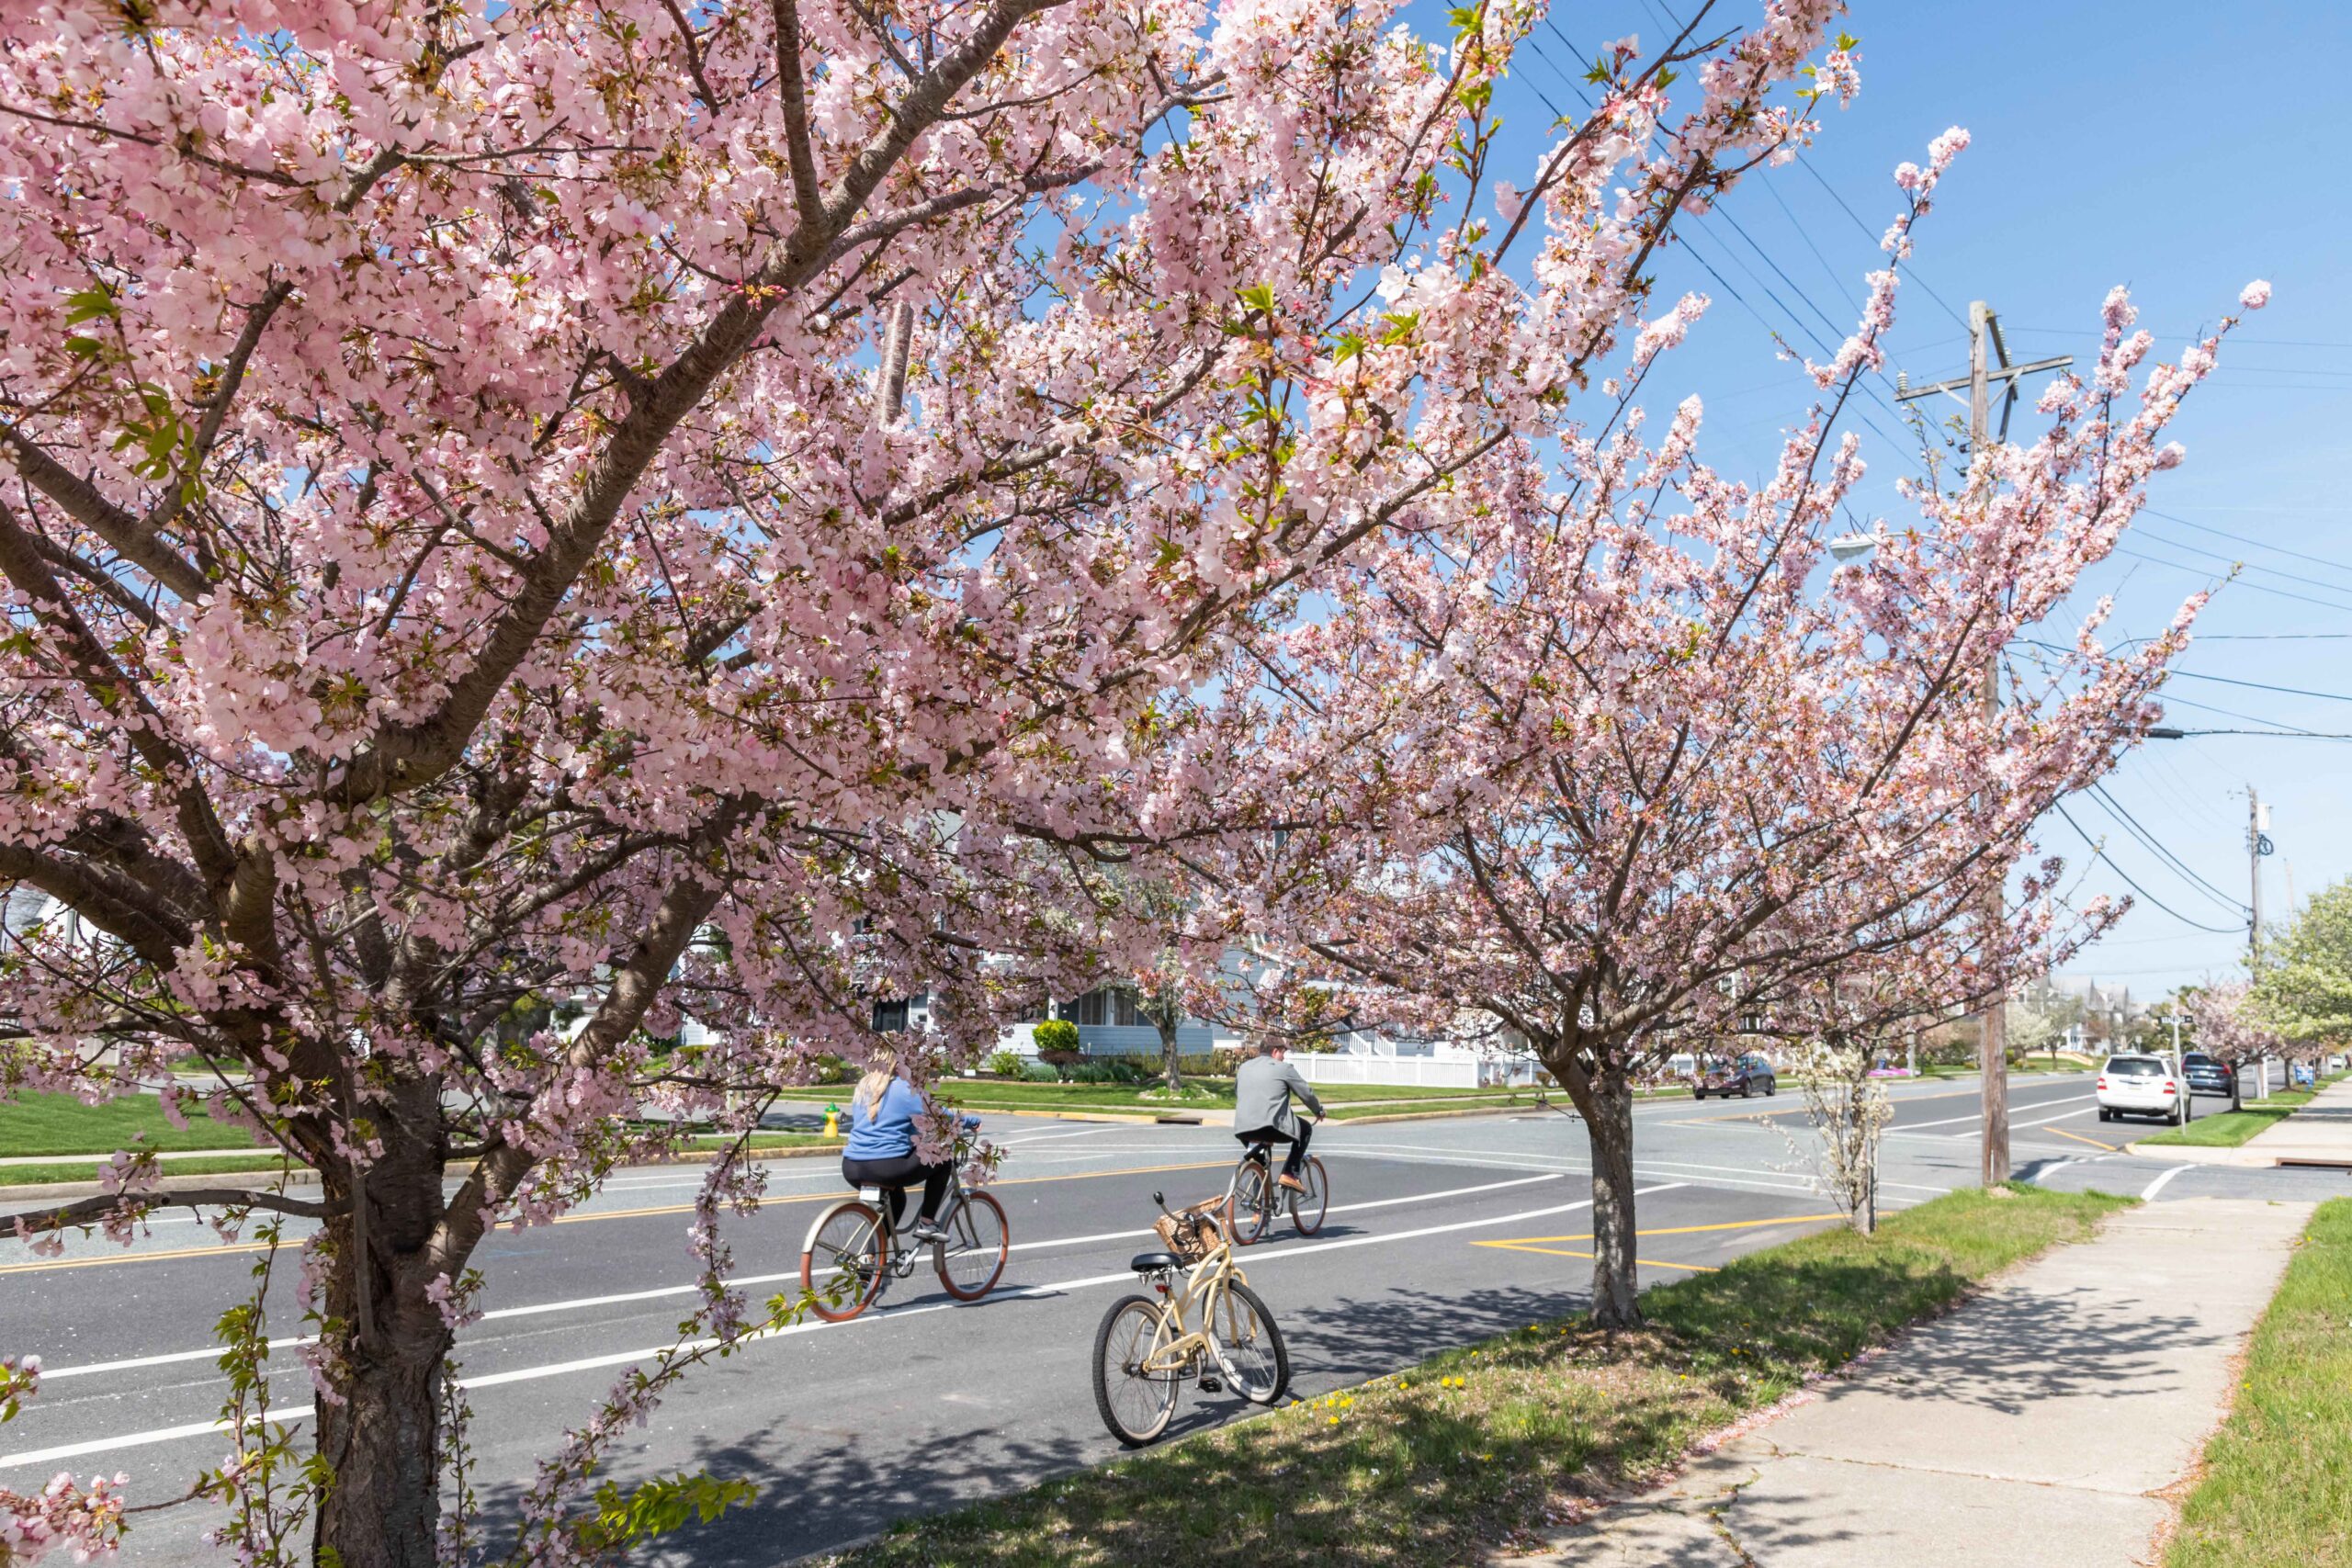 Two people riding bikes behind two cherry blossom trees and a parked bike on a sunny day with a clear blue sky